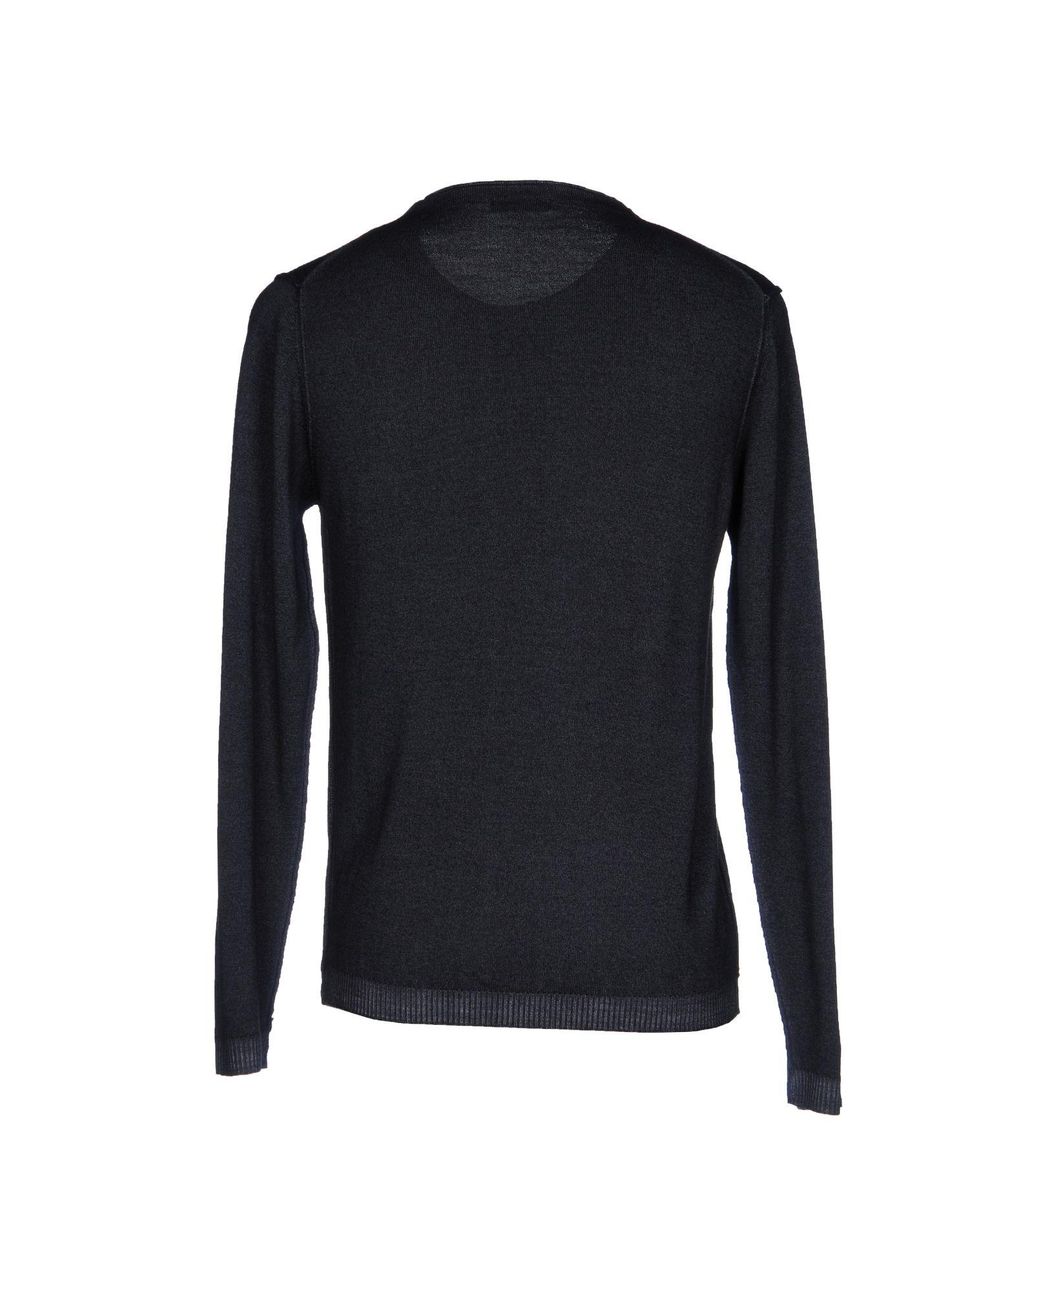 Grey Daniele Alessandrini Wool Sweater in Steel Grey Grey Mens Clothing Sweaters and knitwear V-neck jumpers for Men 